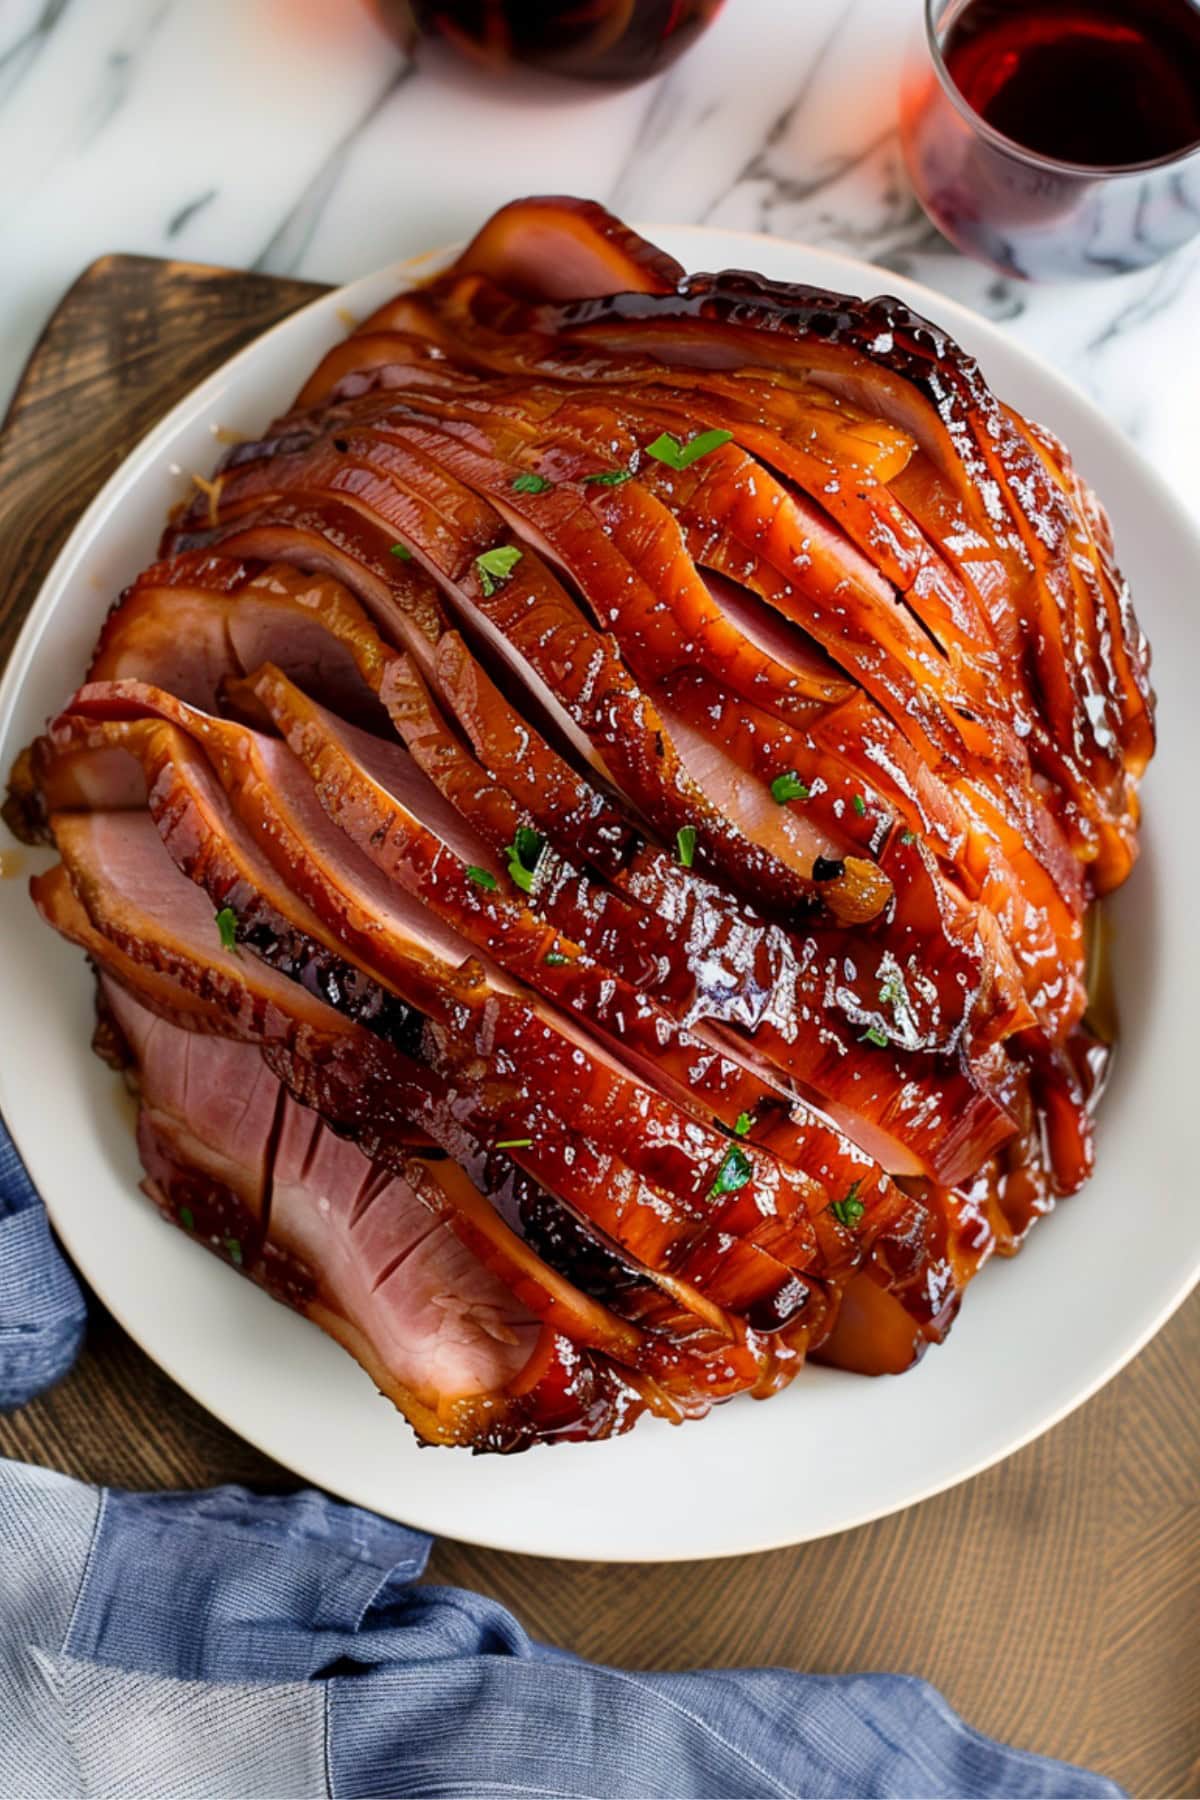 A combination of sweet and spicy Coca-Cola glazed ham with sugar and spices